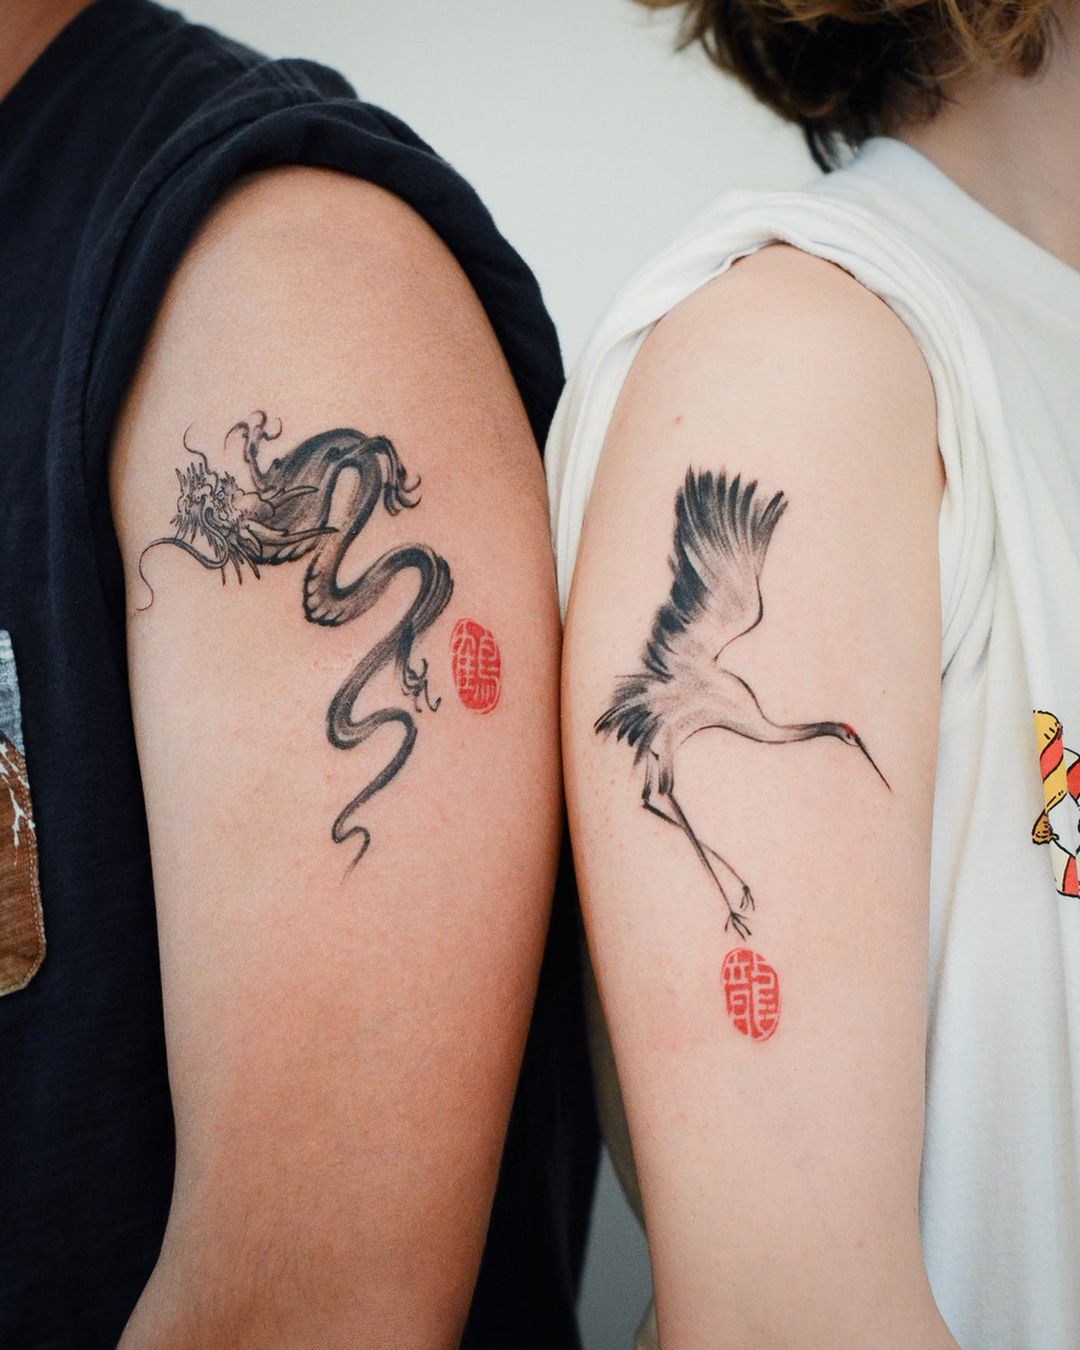 50 Matching Couple Tattoo Ideas To Try with Your Significant Other - Hairstyle